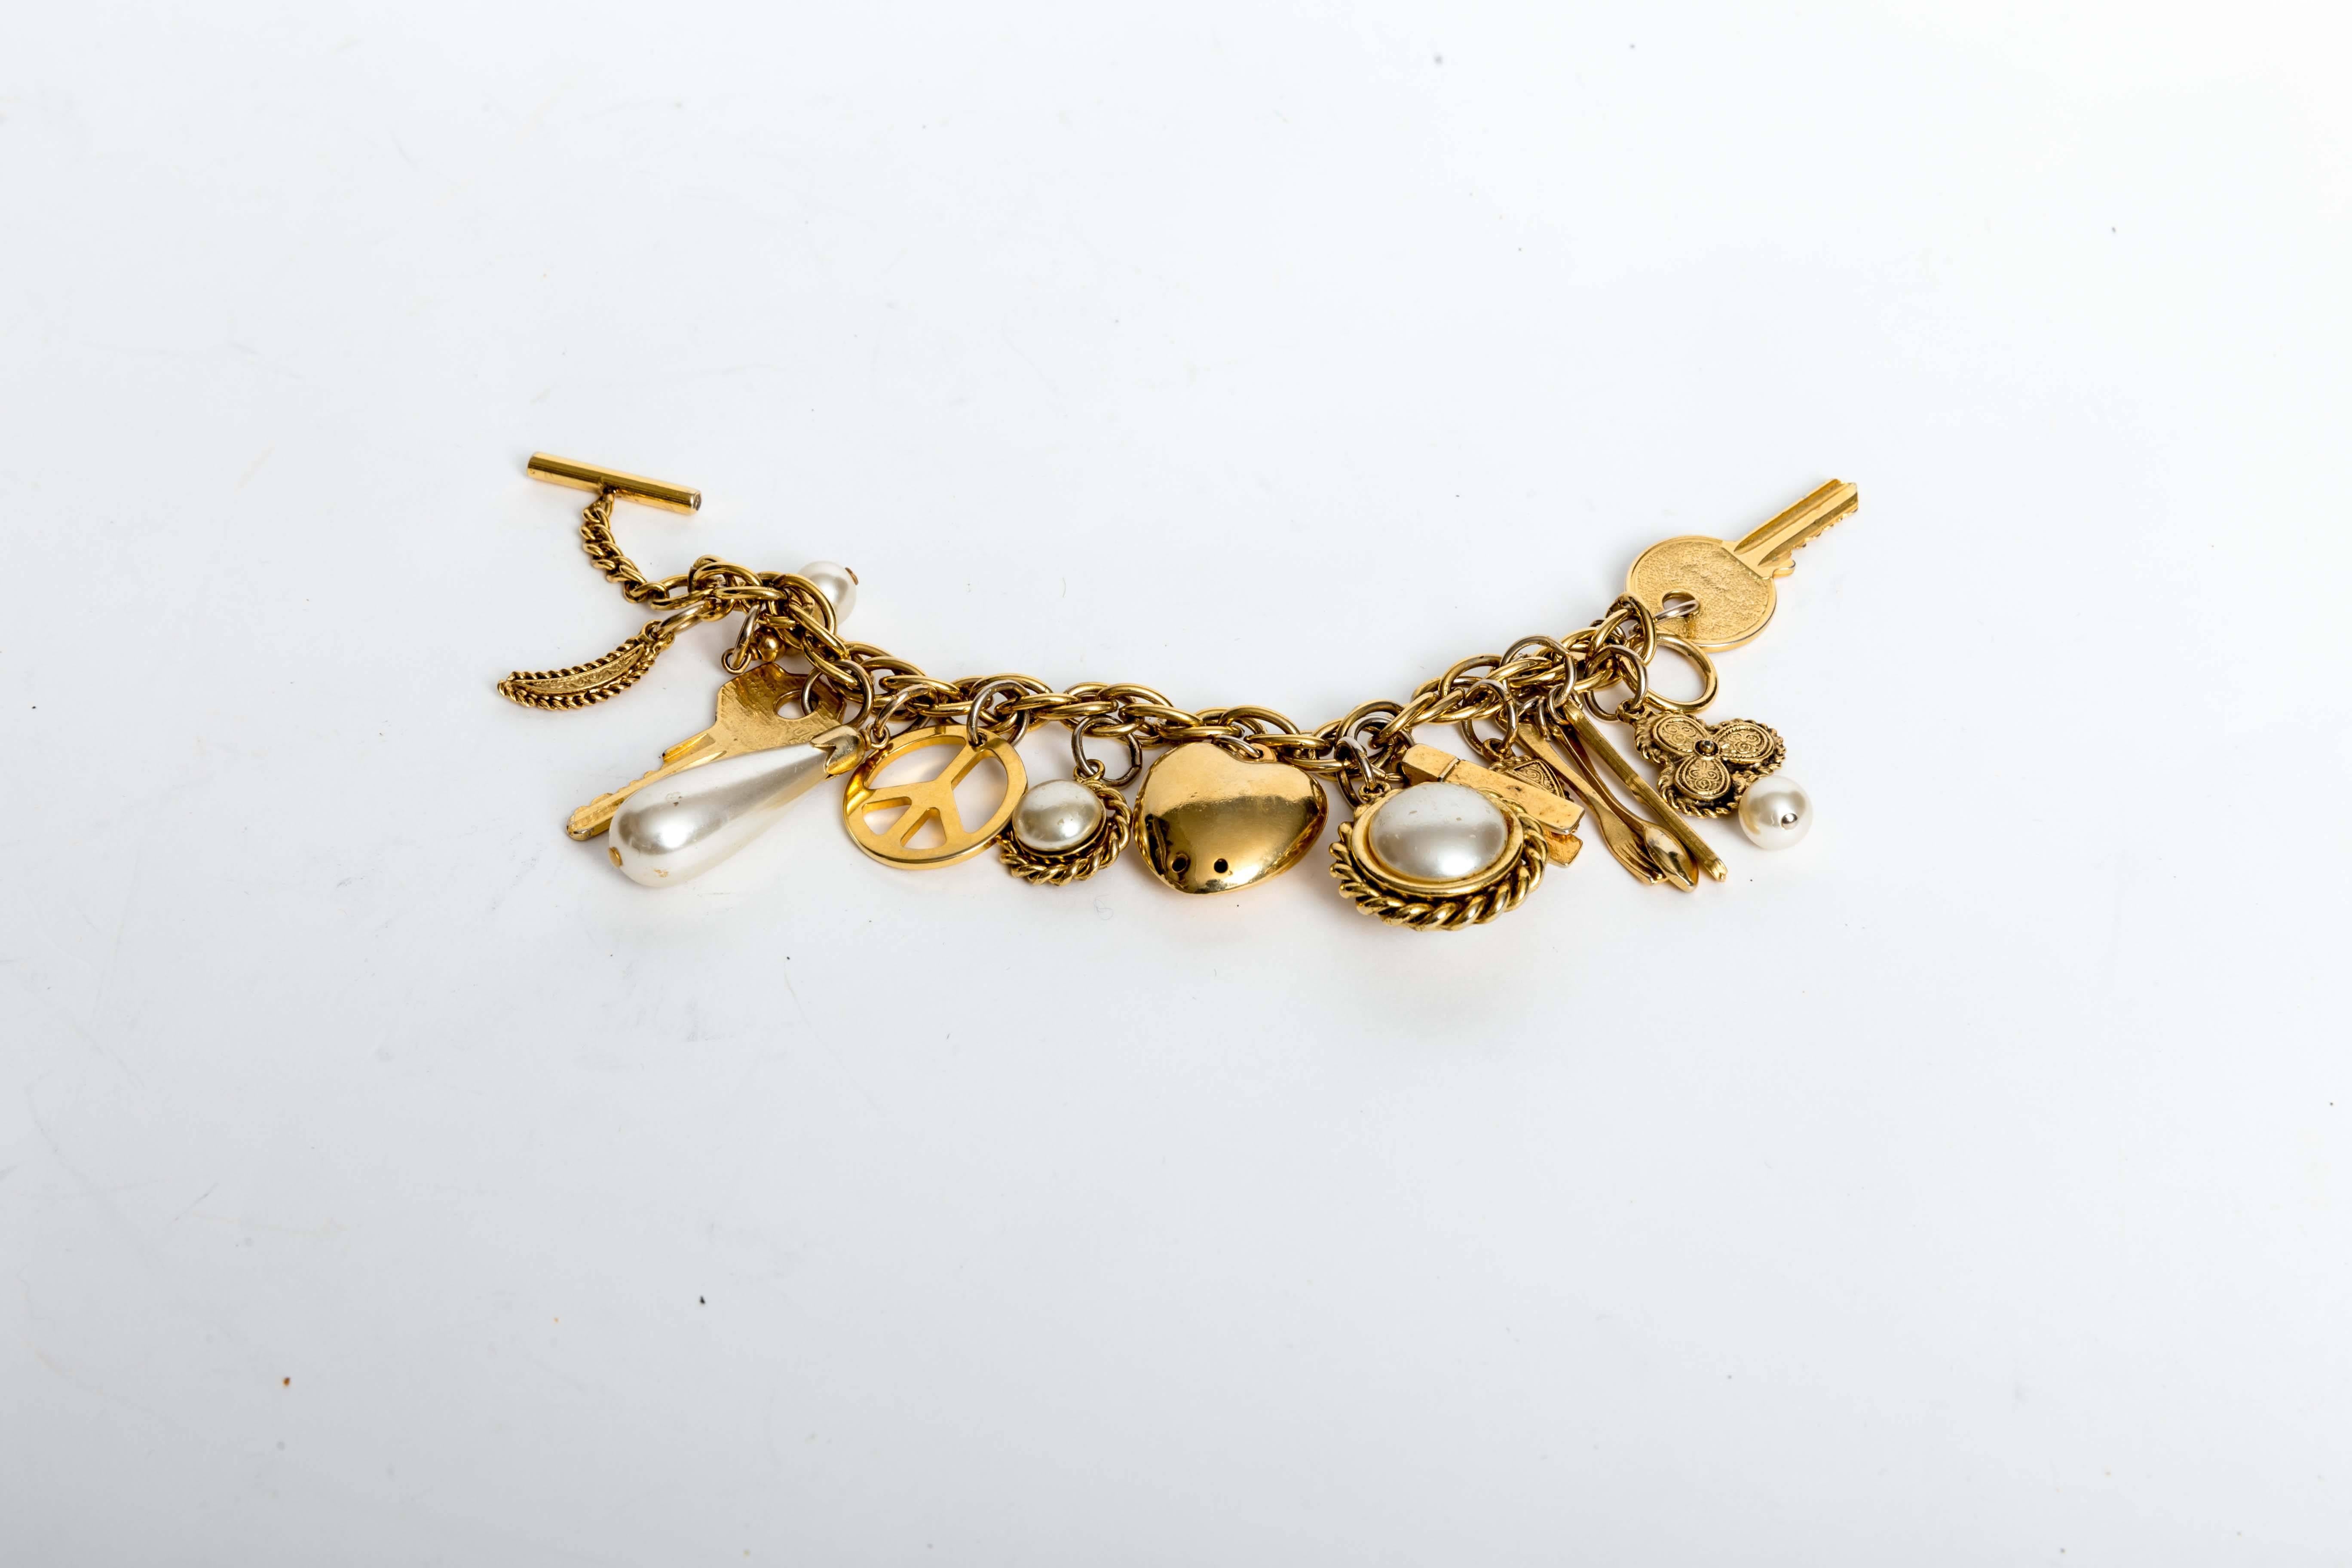 Signed Moschino Charm Bracelet with Pearls and Gold Charms. Charms include a puffed heart, key, three leaf clover with pearl drop, clothes pin and peace sign to name a few. There are a total of 14 charms with a toggle closure. This is a fun piece of